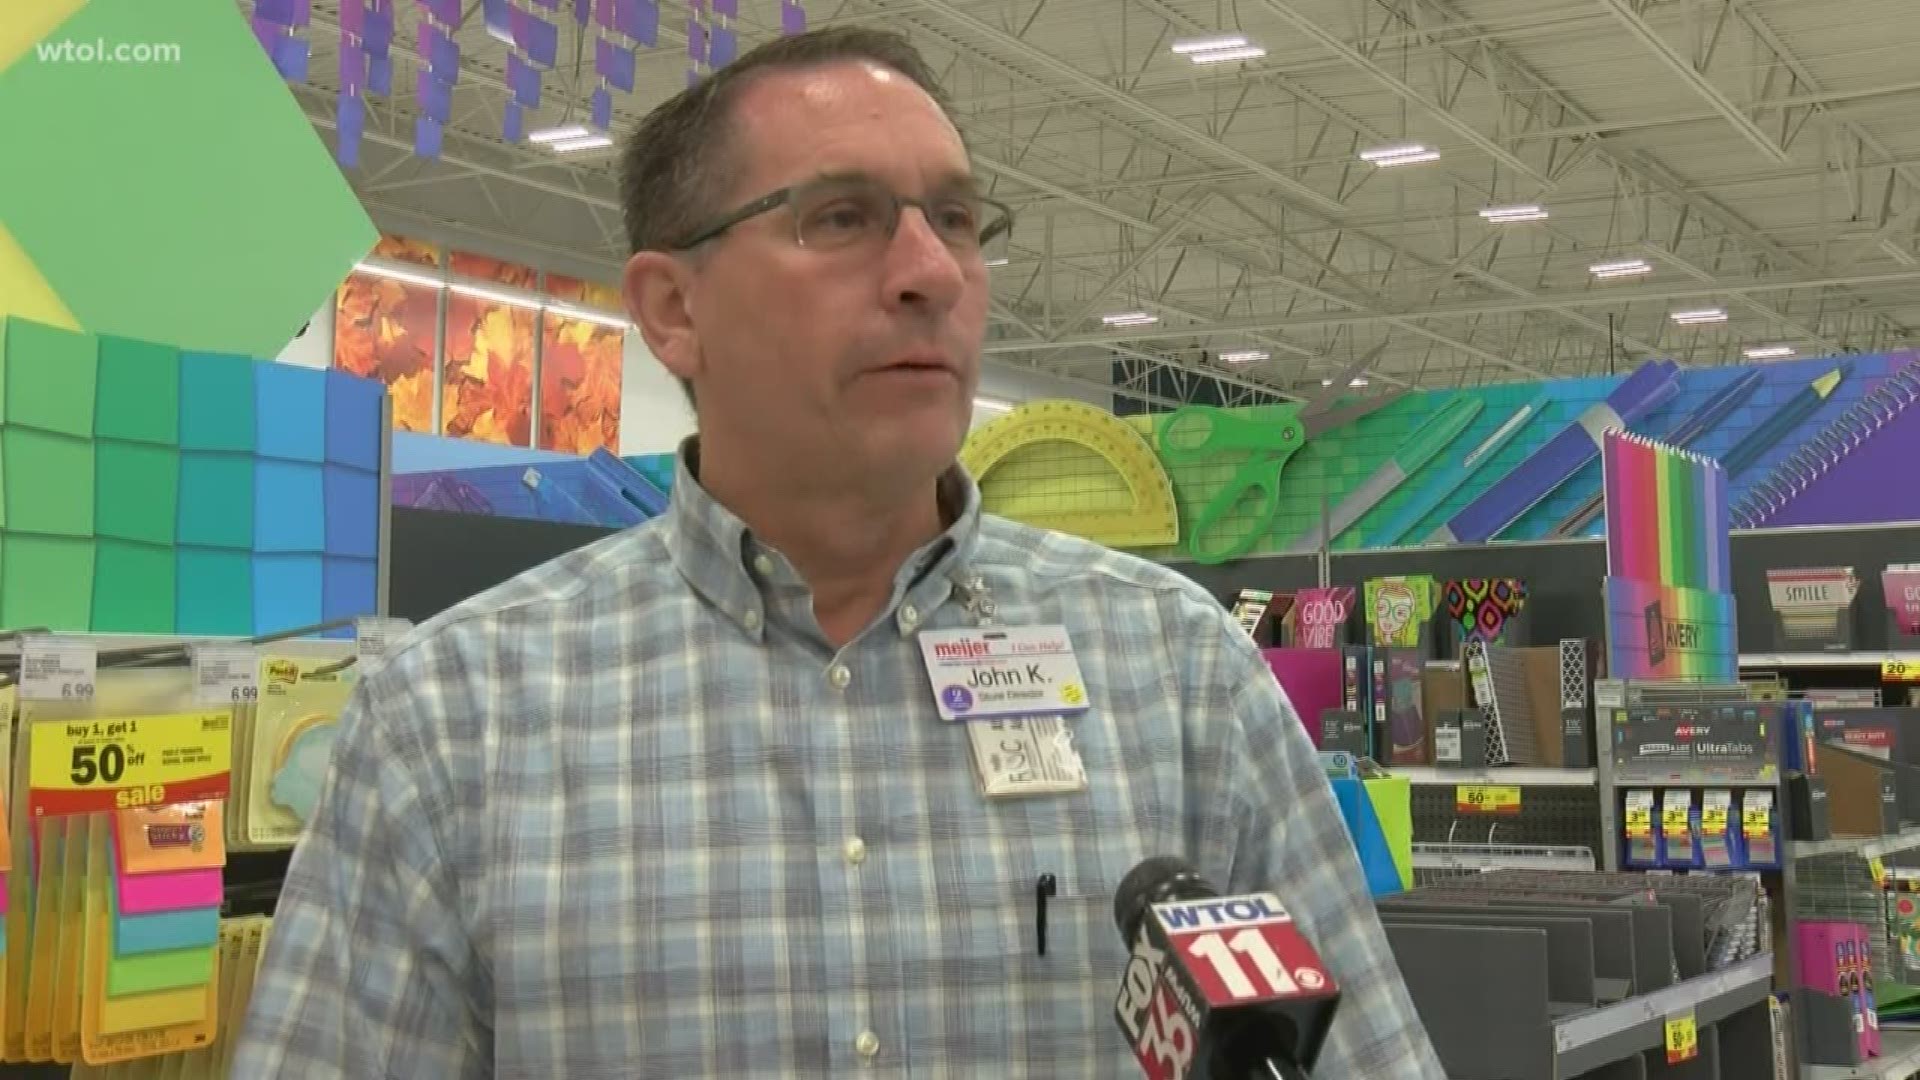 As many students go back to school this week, last minute shoppers rush to stock on school supplies.